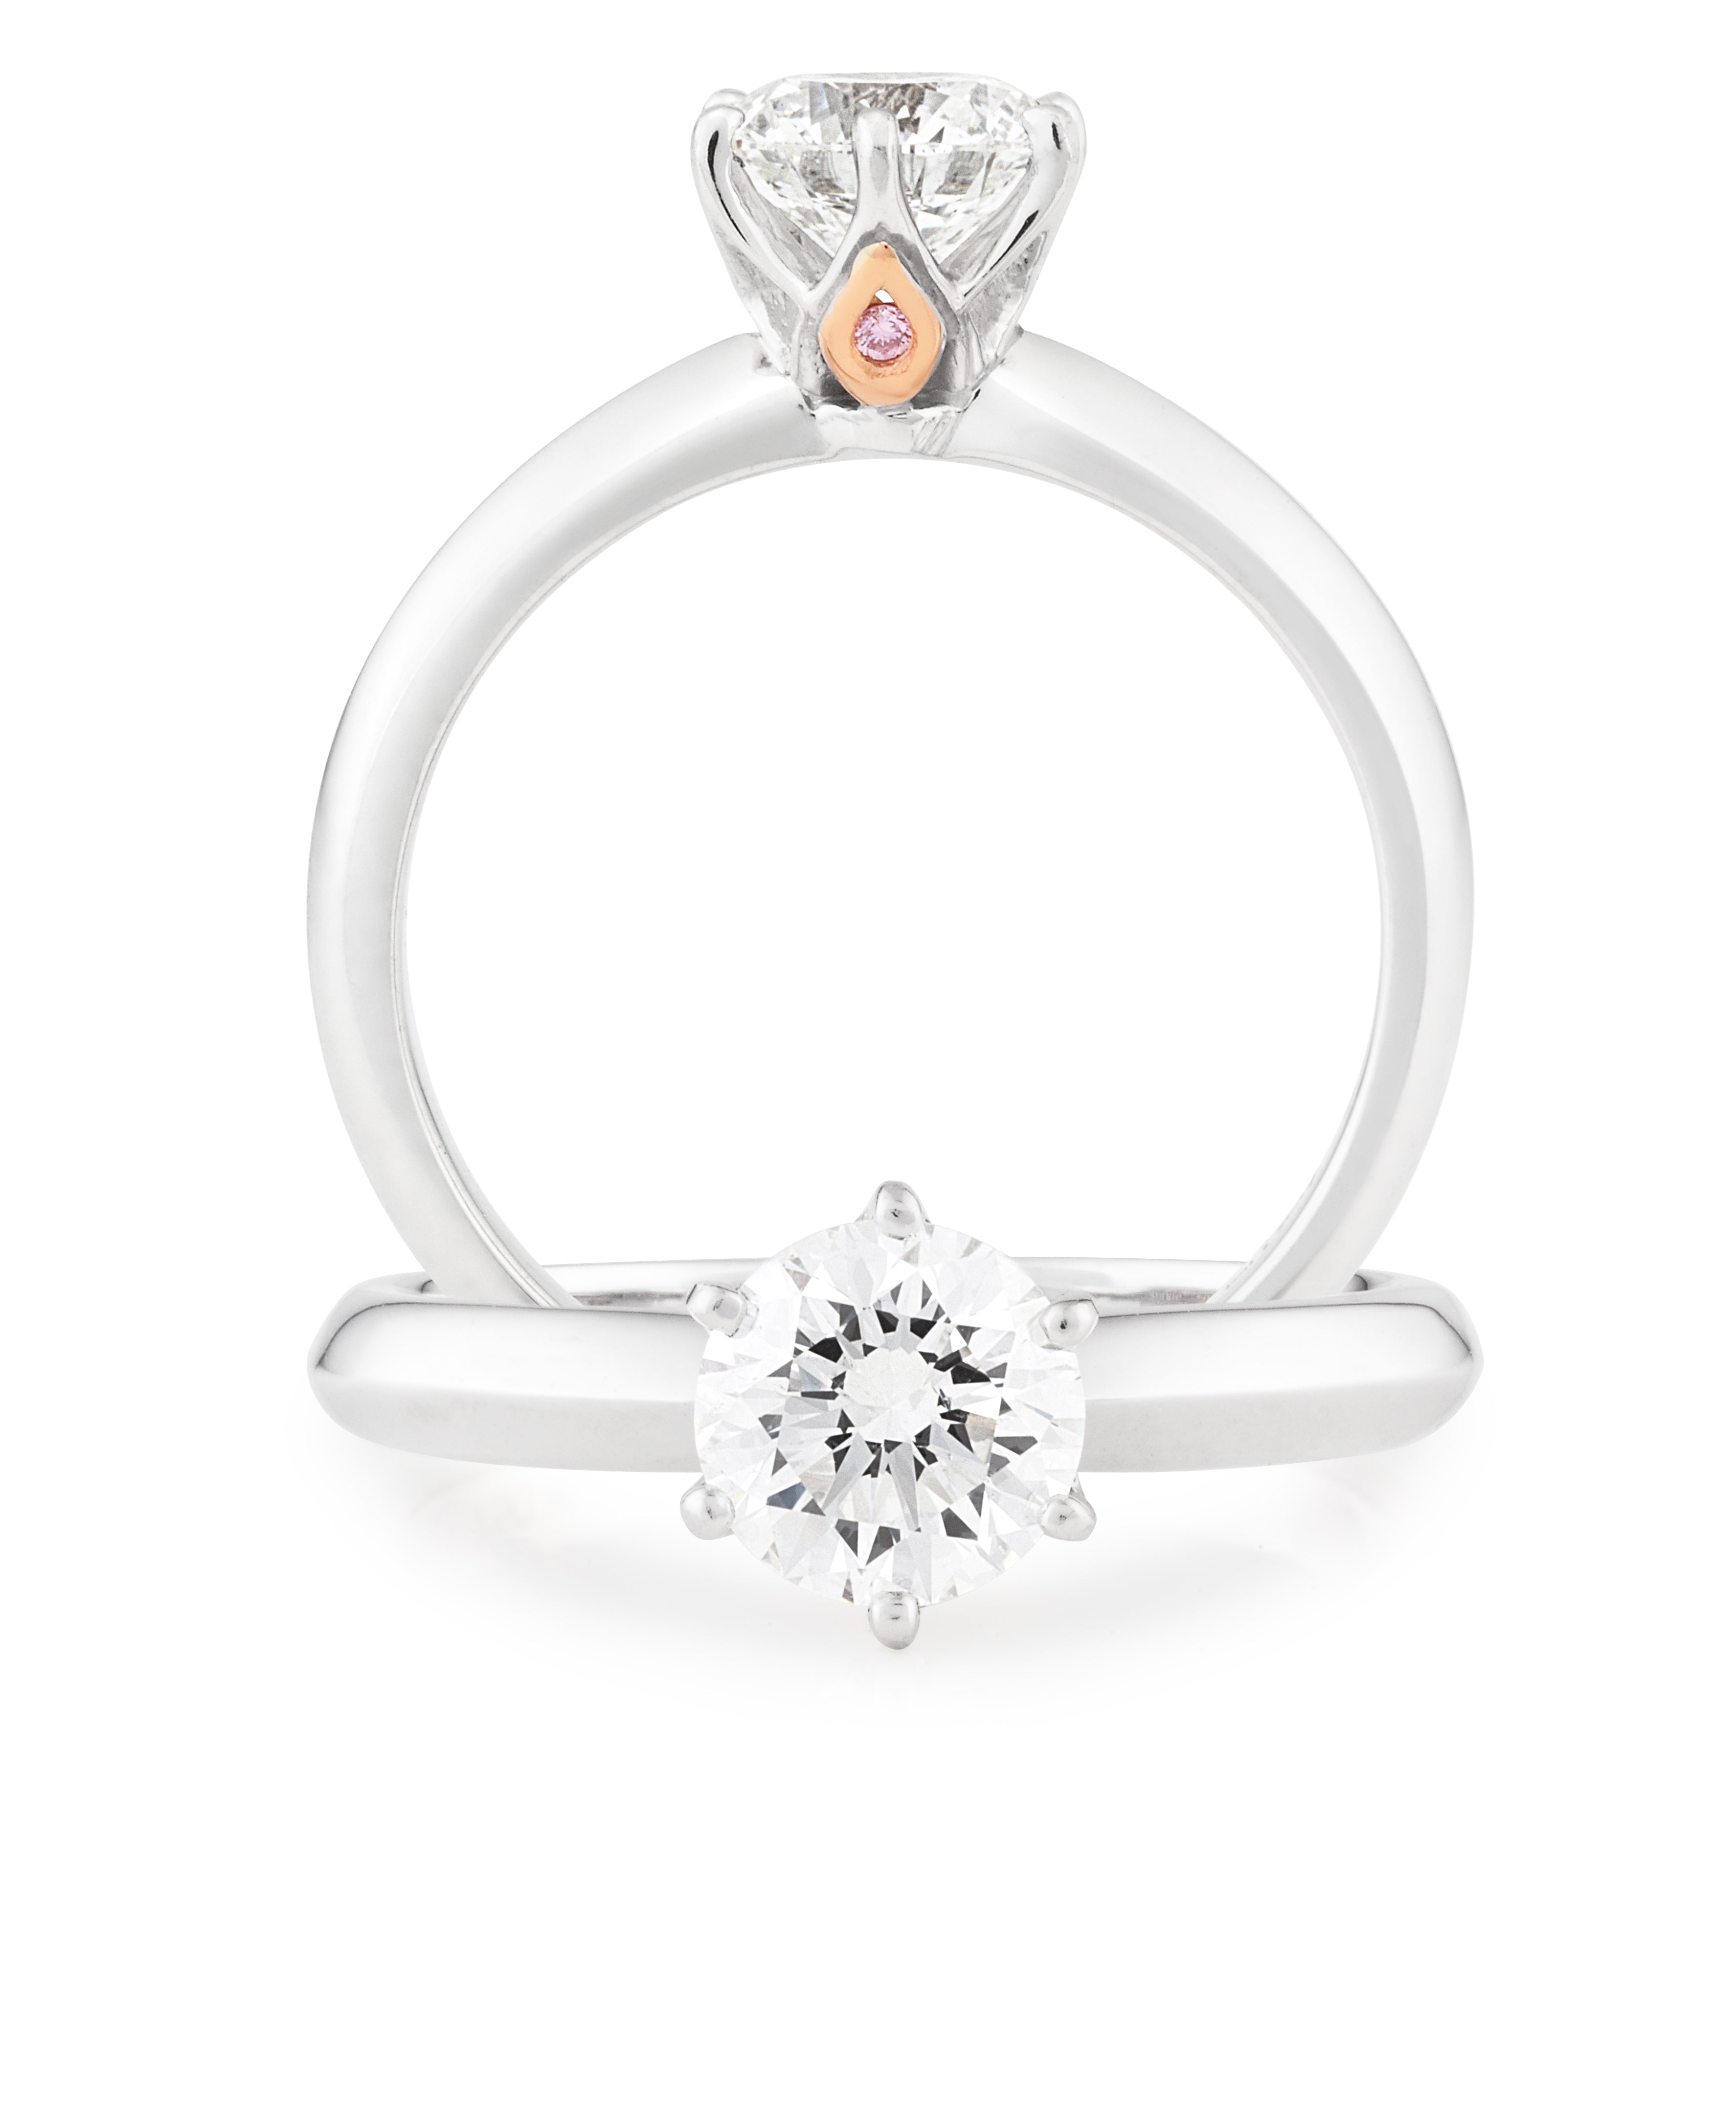 18ct White Gold Diamond Claw Set Engagement Ring, Pink Caviar